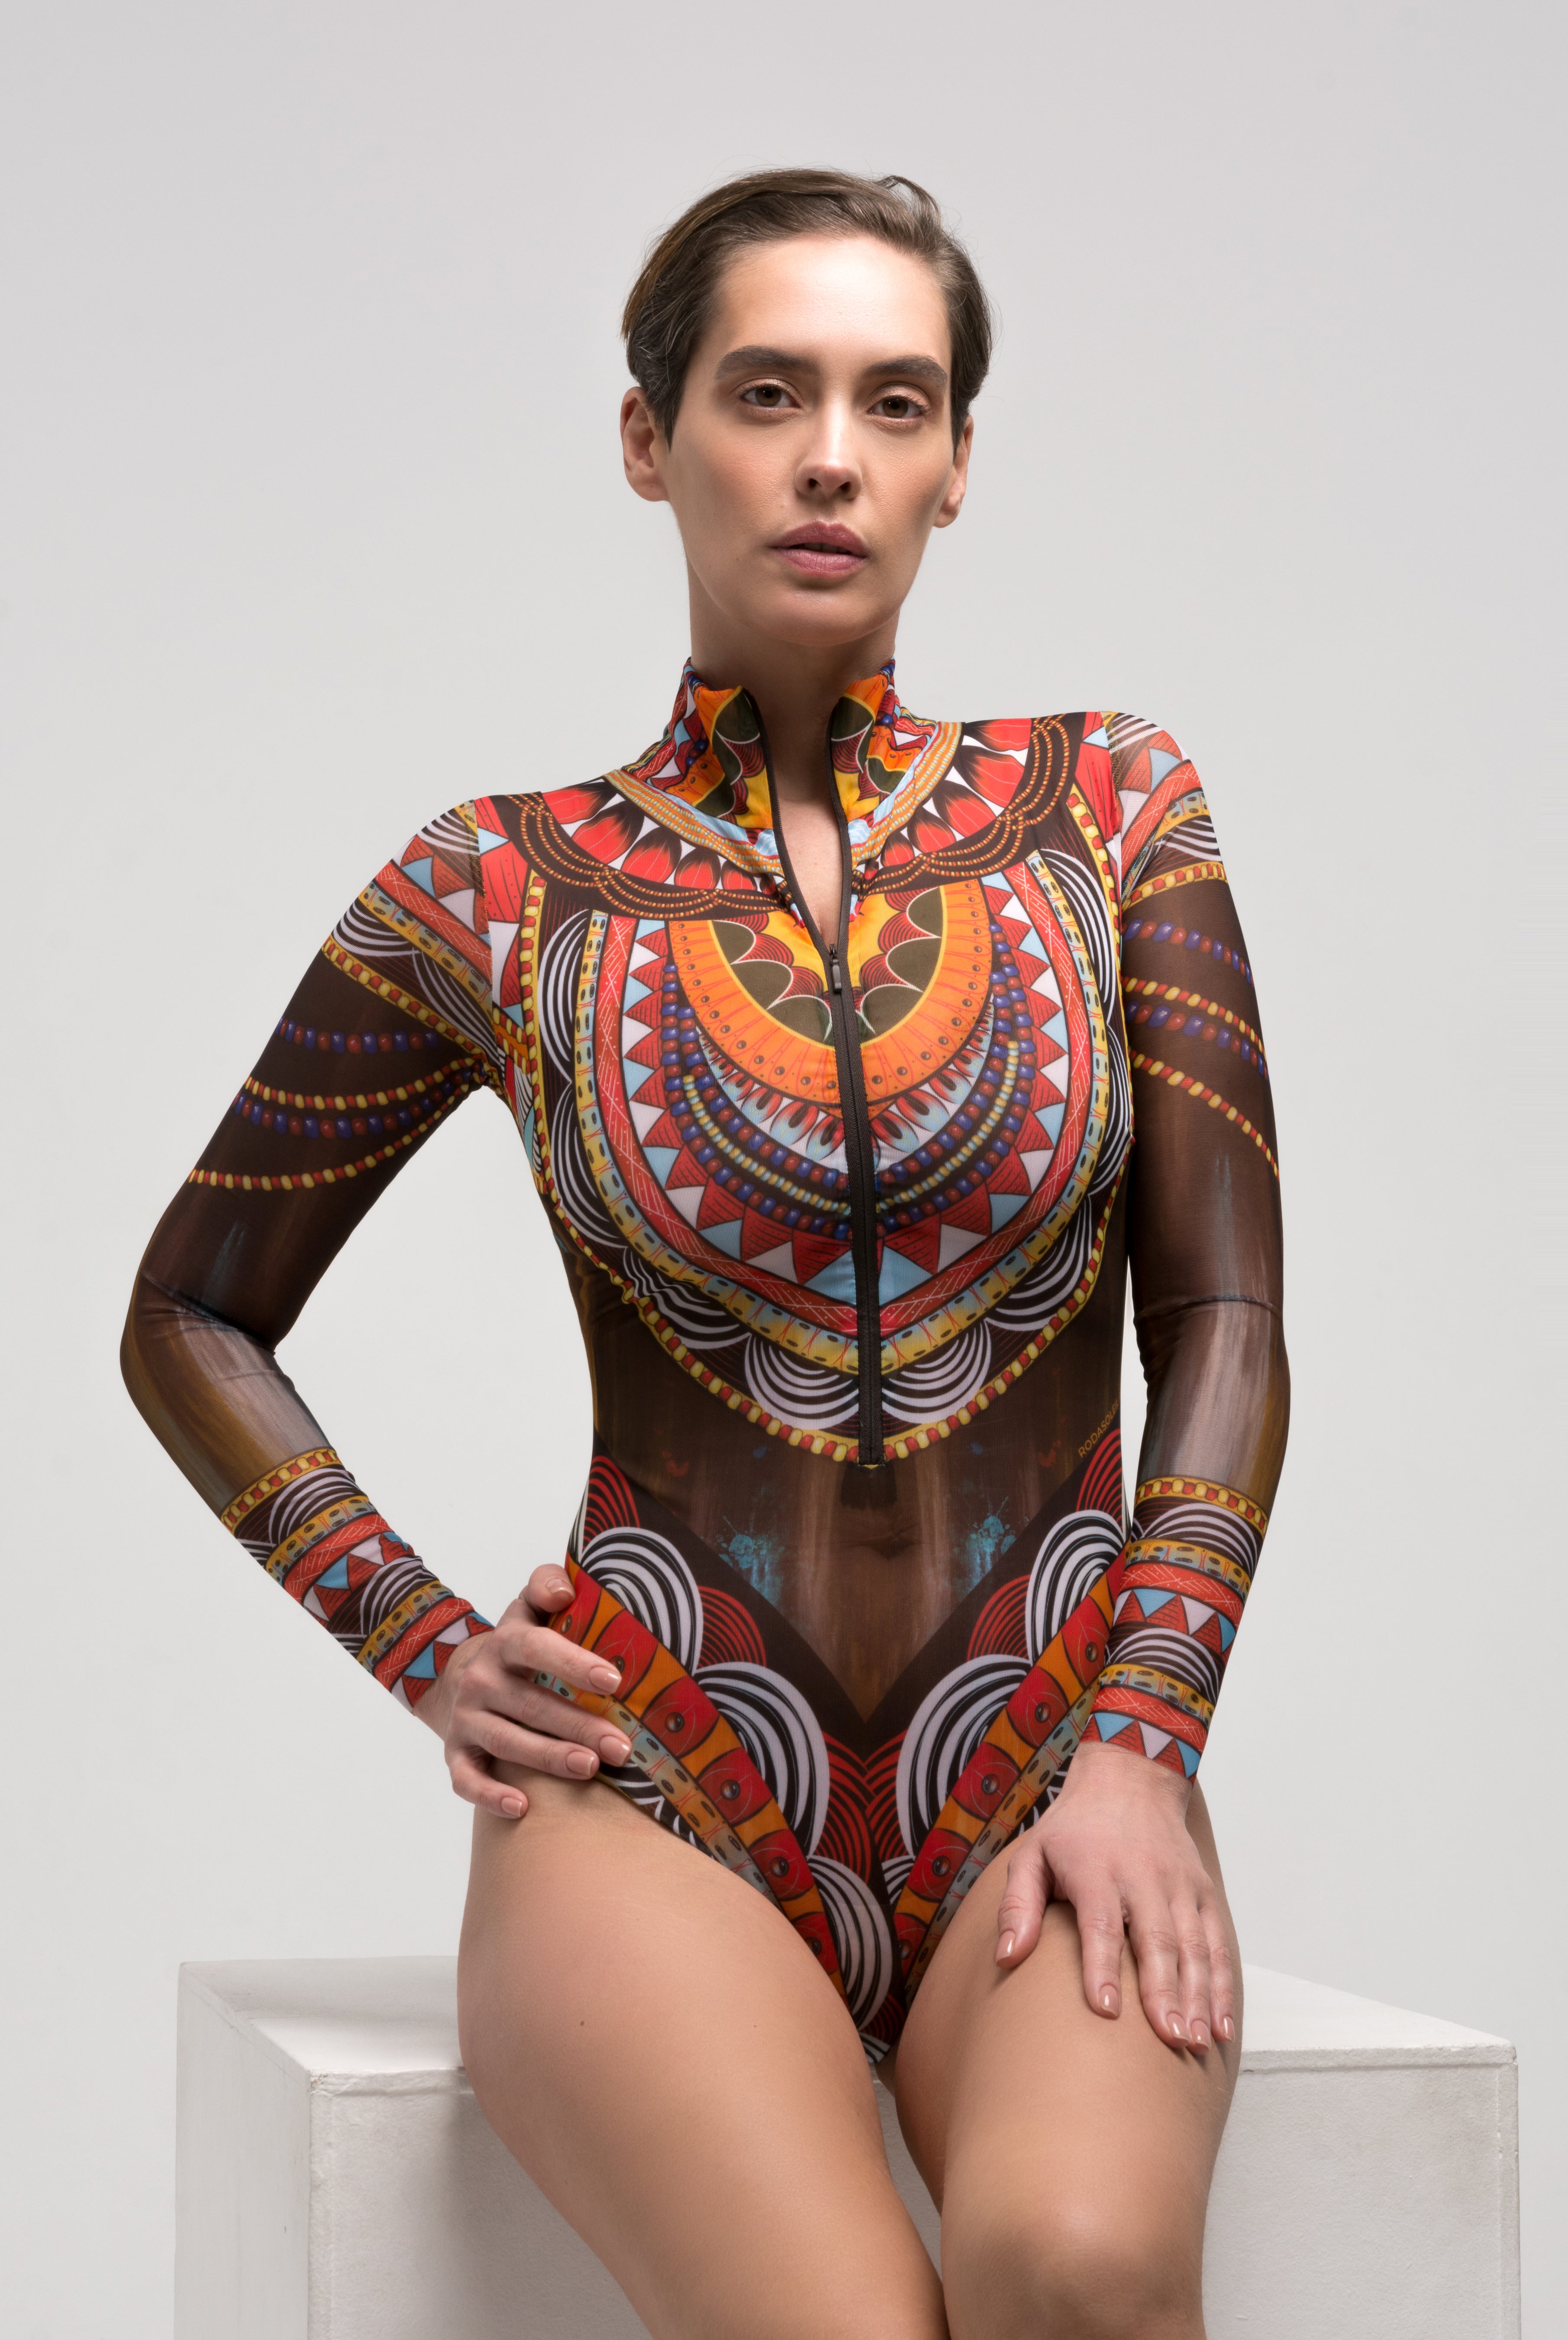 This file showcases the world's leading smart swimsuit brand, known for innovation and sustainability. Featuring the Africa print, the one-piece with sleeves and zipper offers runway-inspired style. Ideal for individuals with visual impairment or low-bandwidth connections